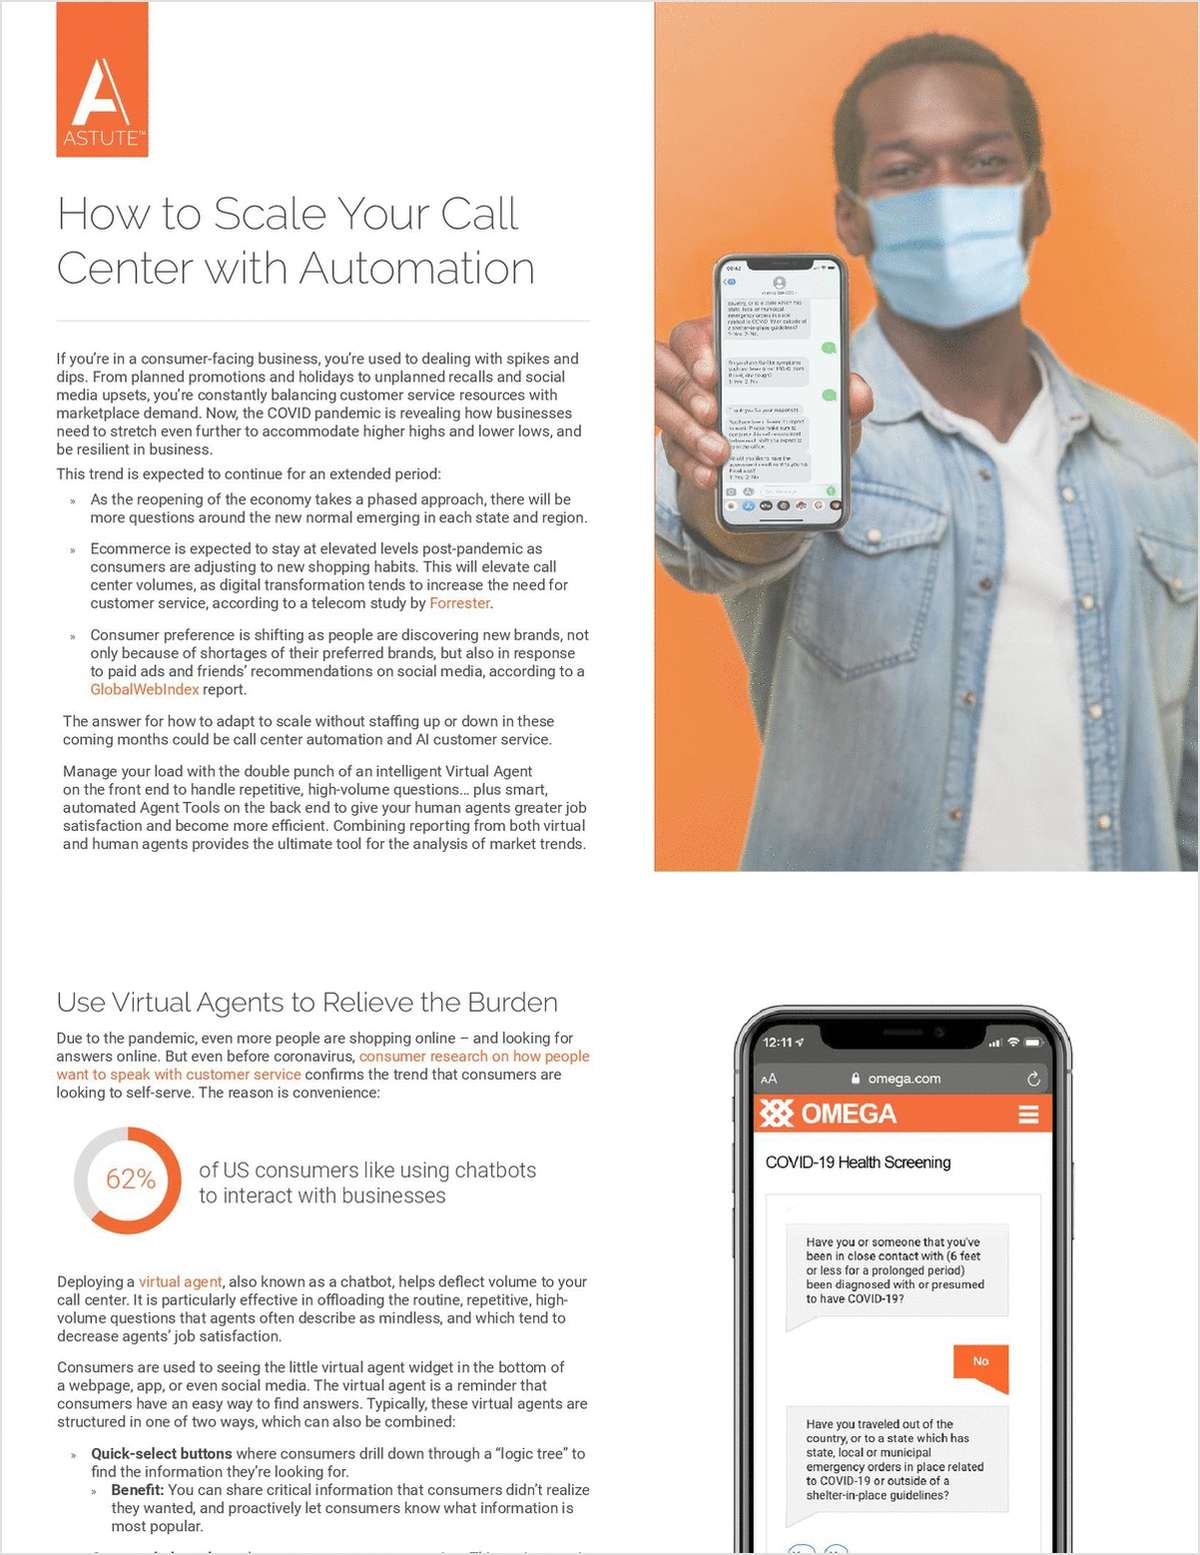 Your Guide to Scaling and Adapting Your Call Center Through Automation